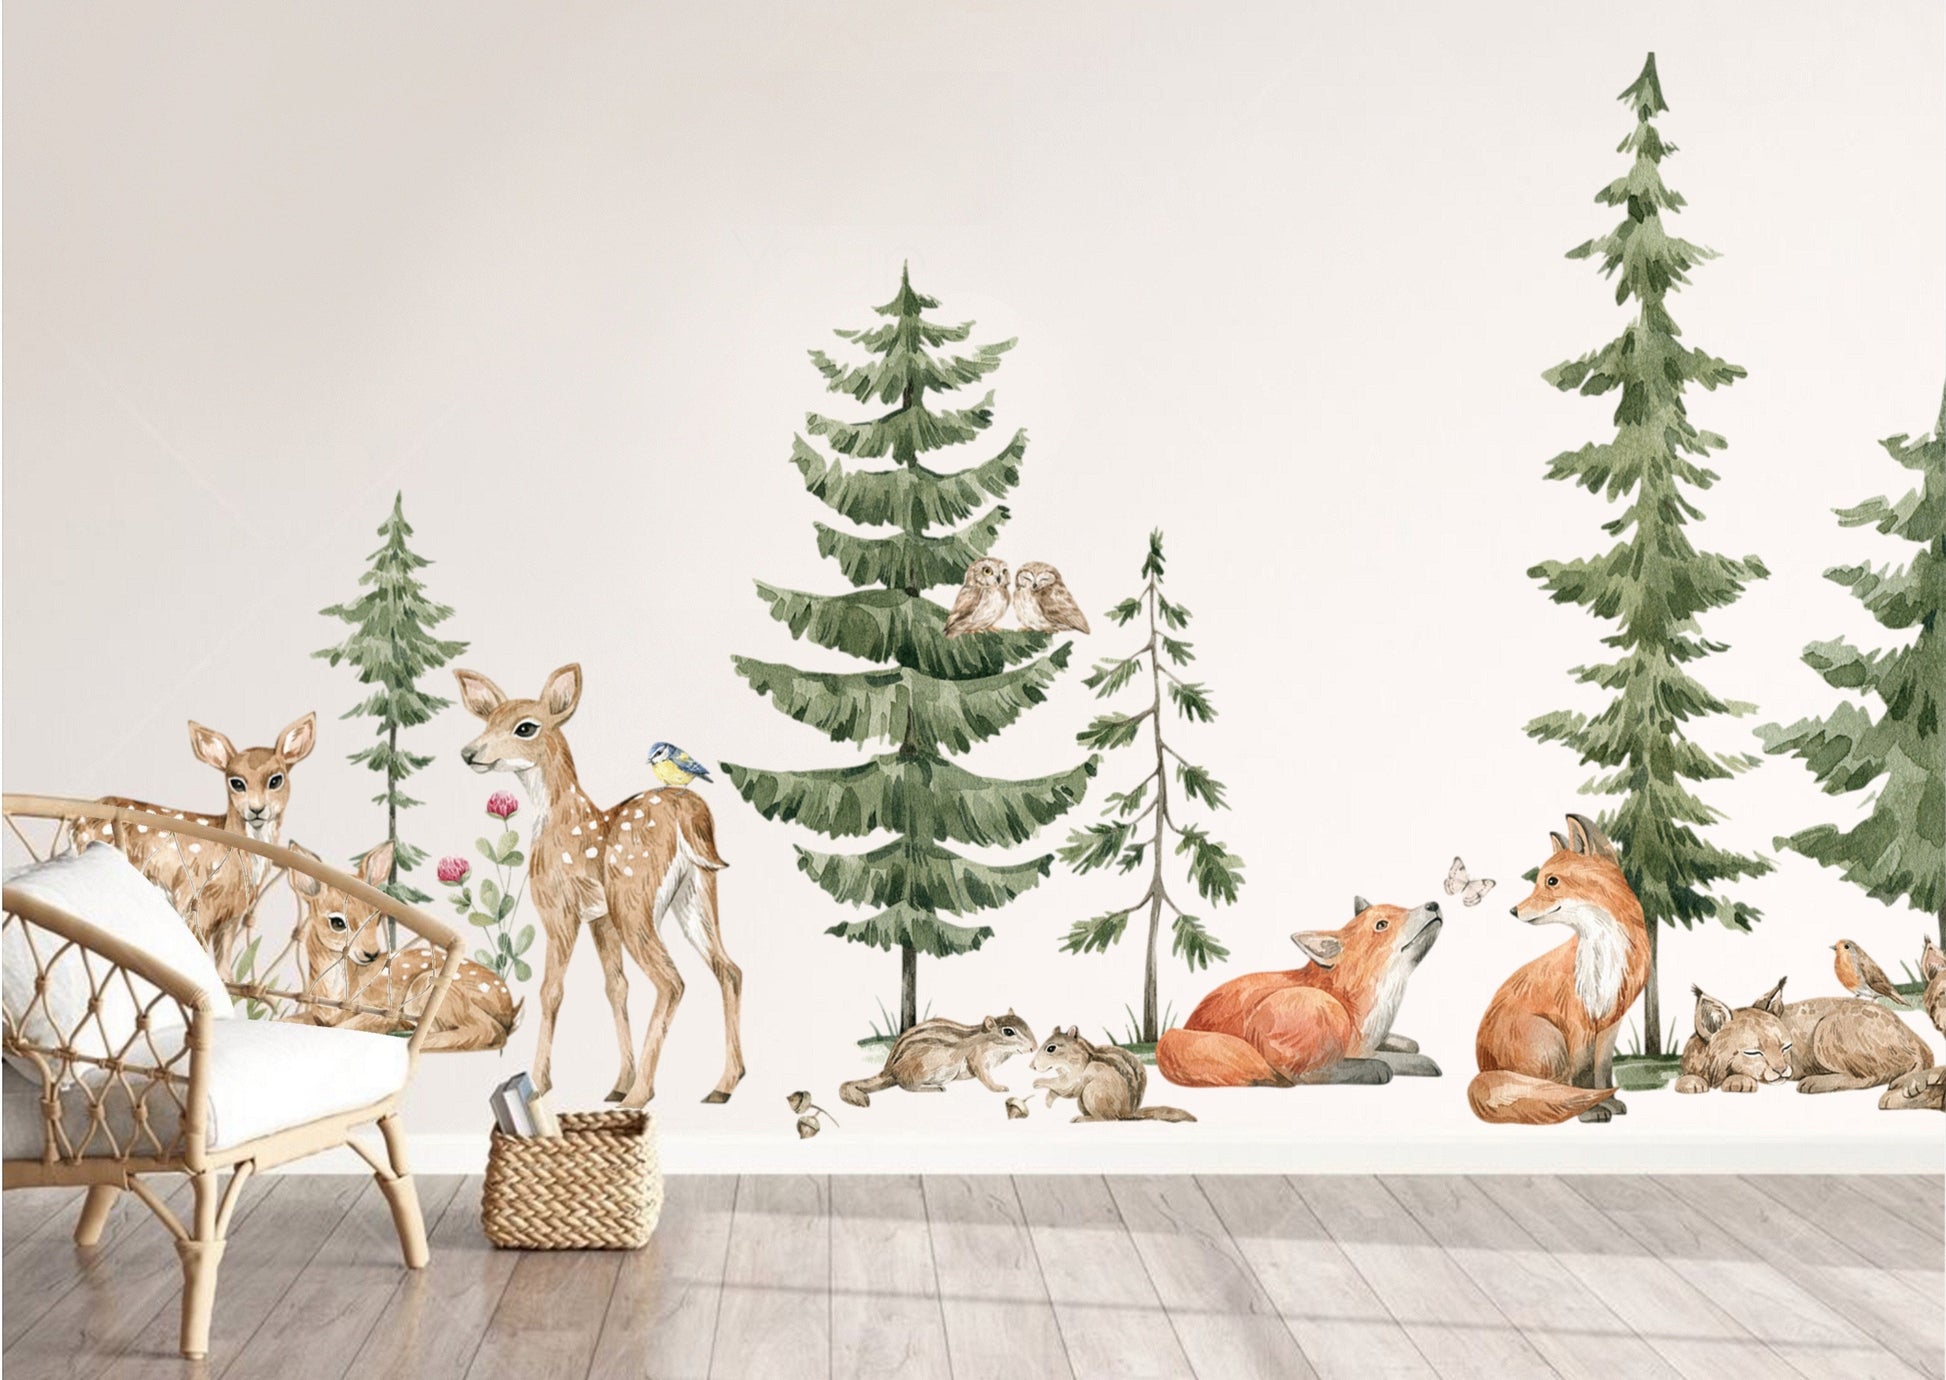 Woodland babies hand painted wallpapers Tweet-able